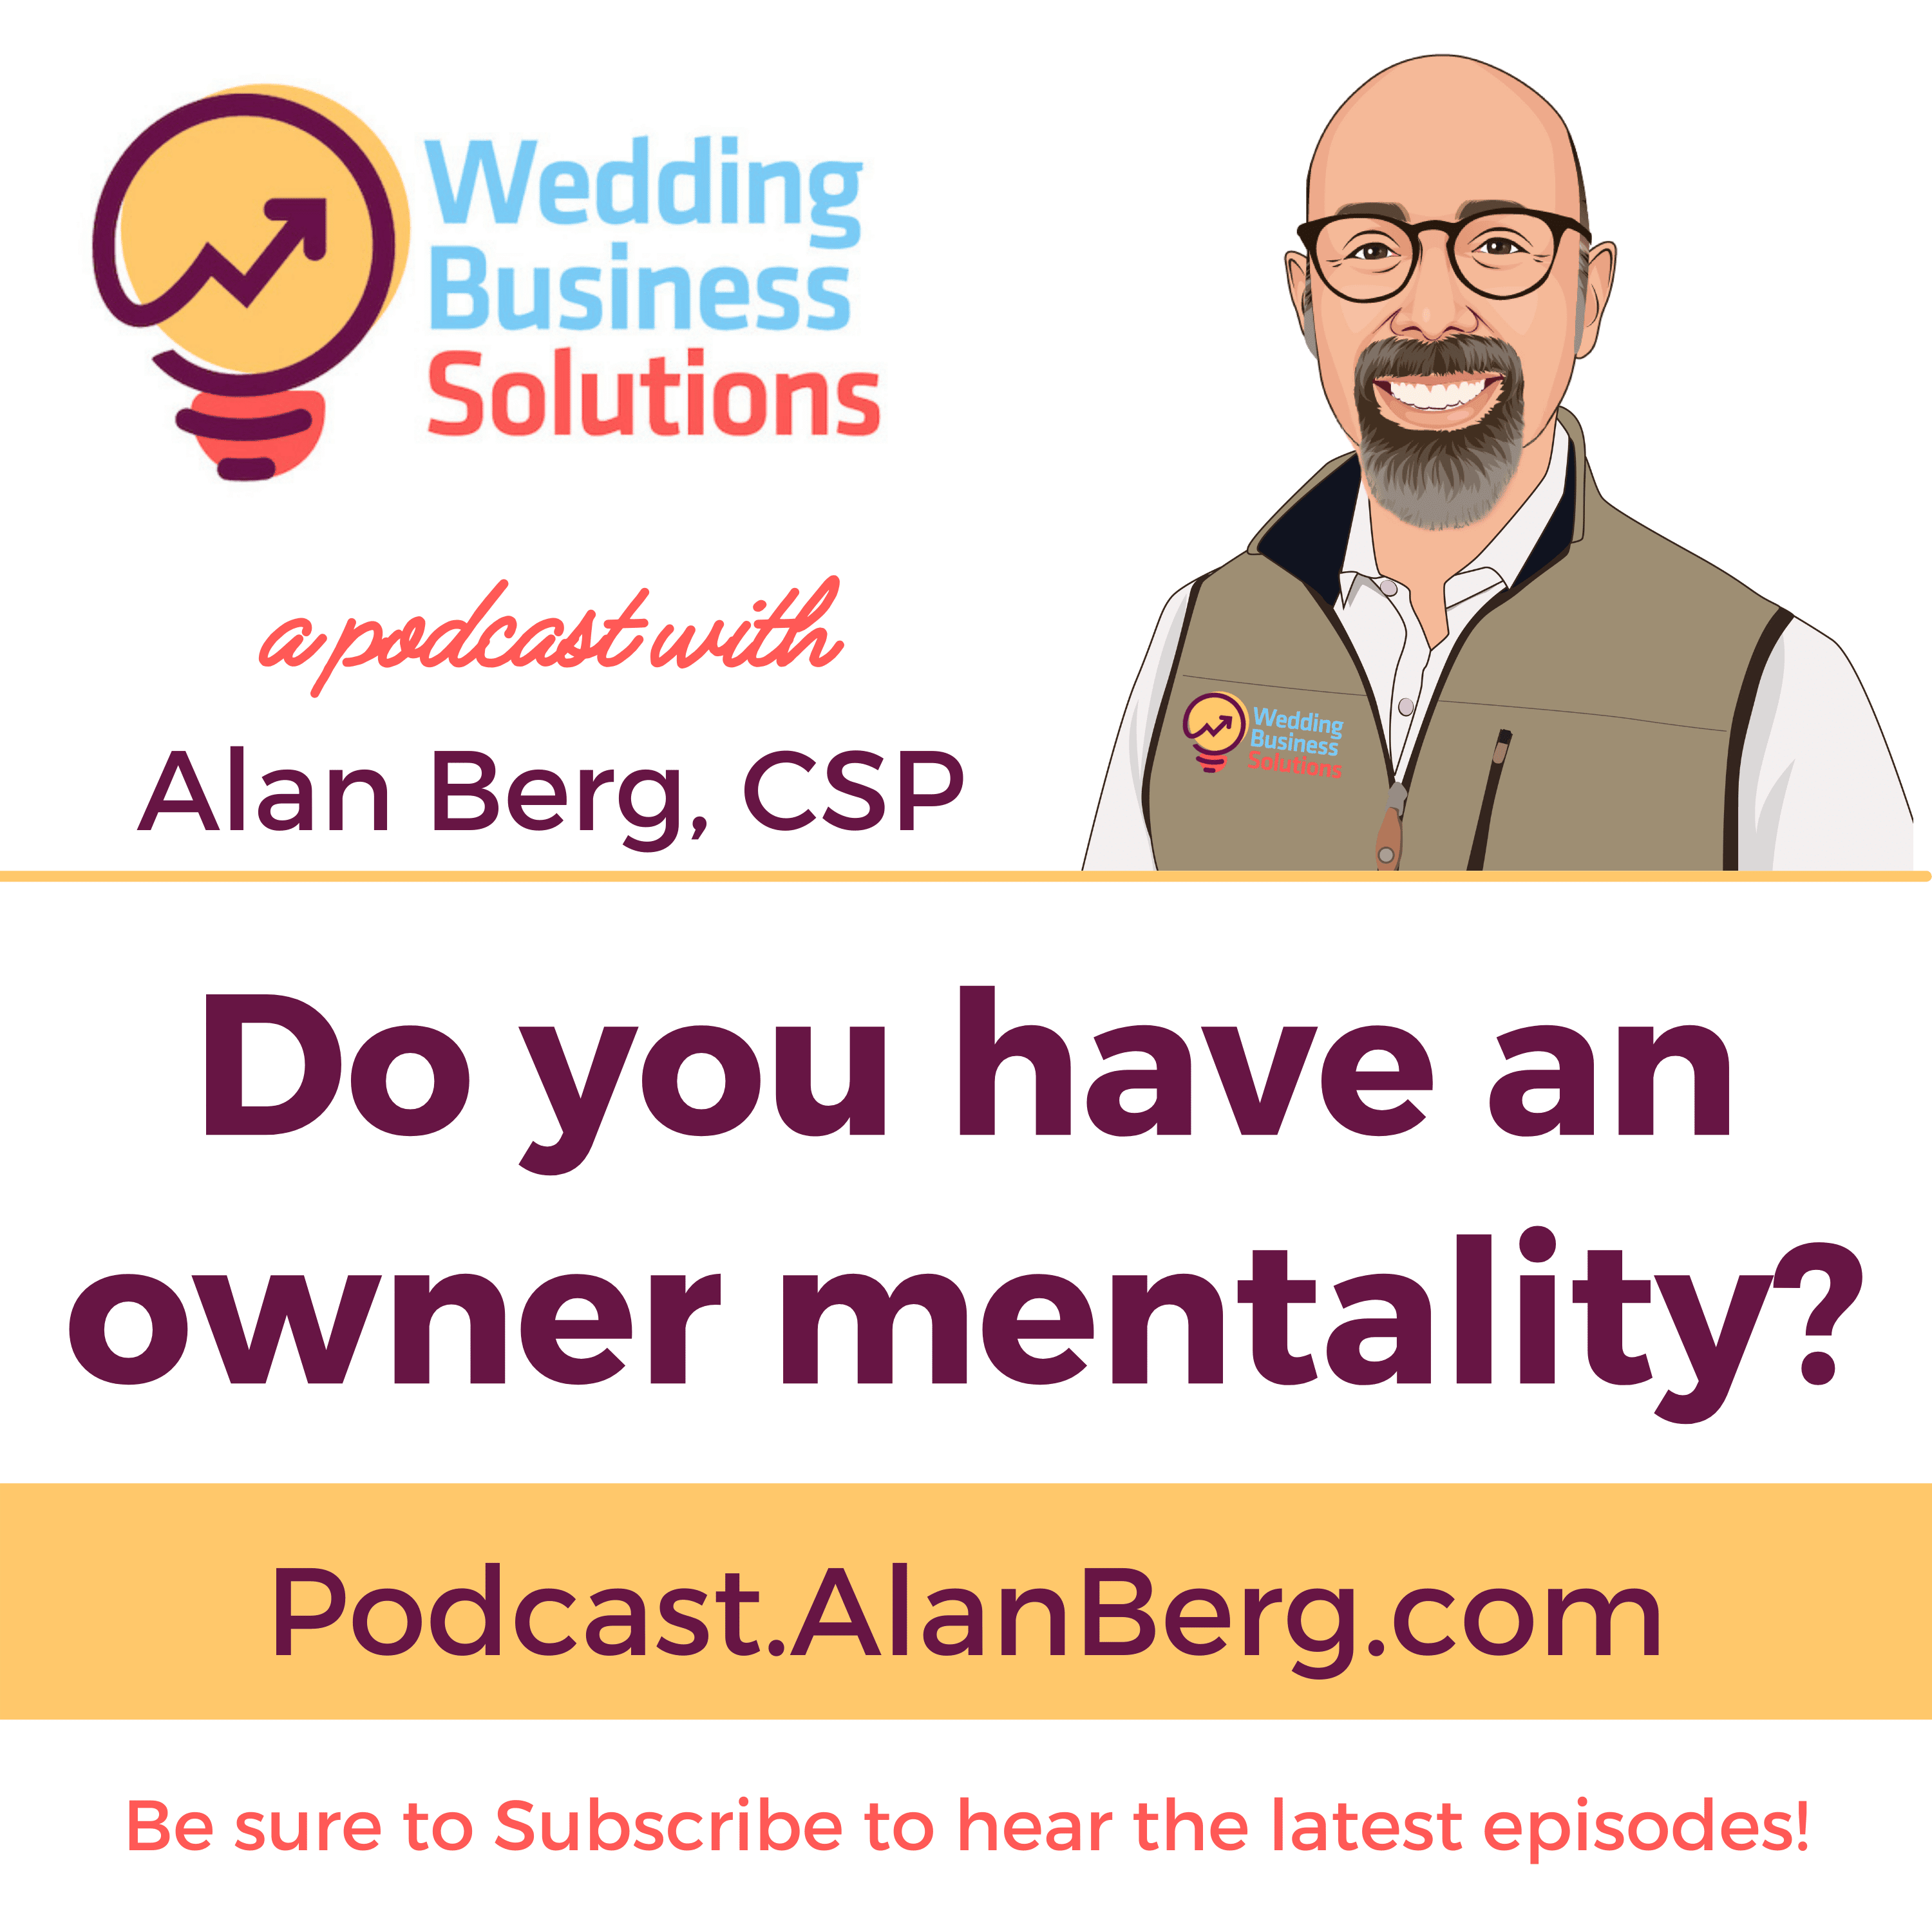 Do you have an owner mentality? – Podcast Transcript